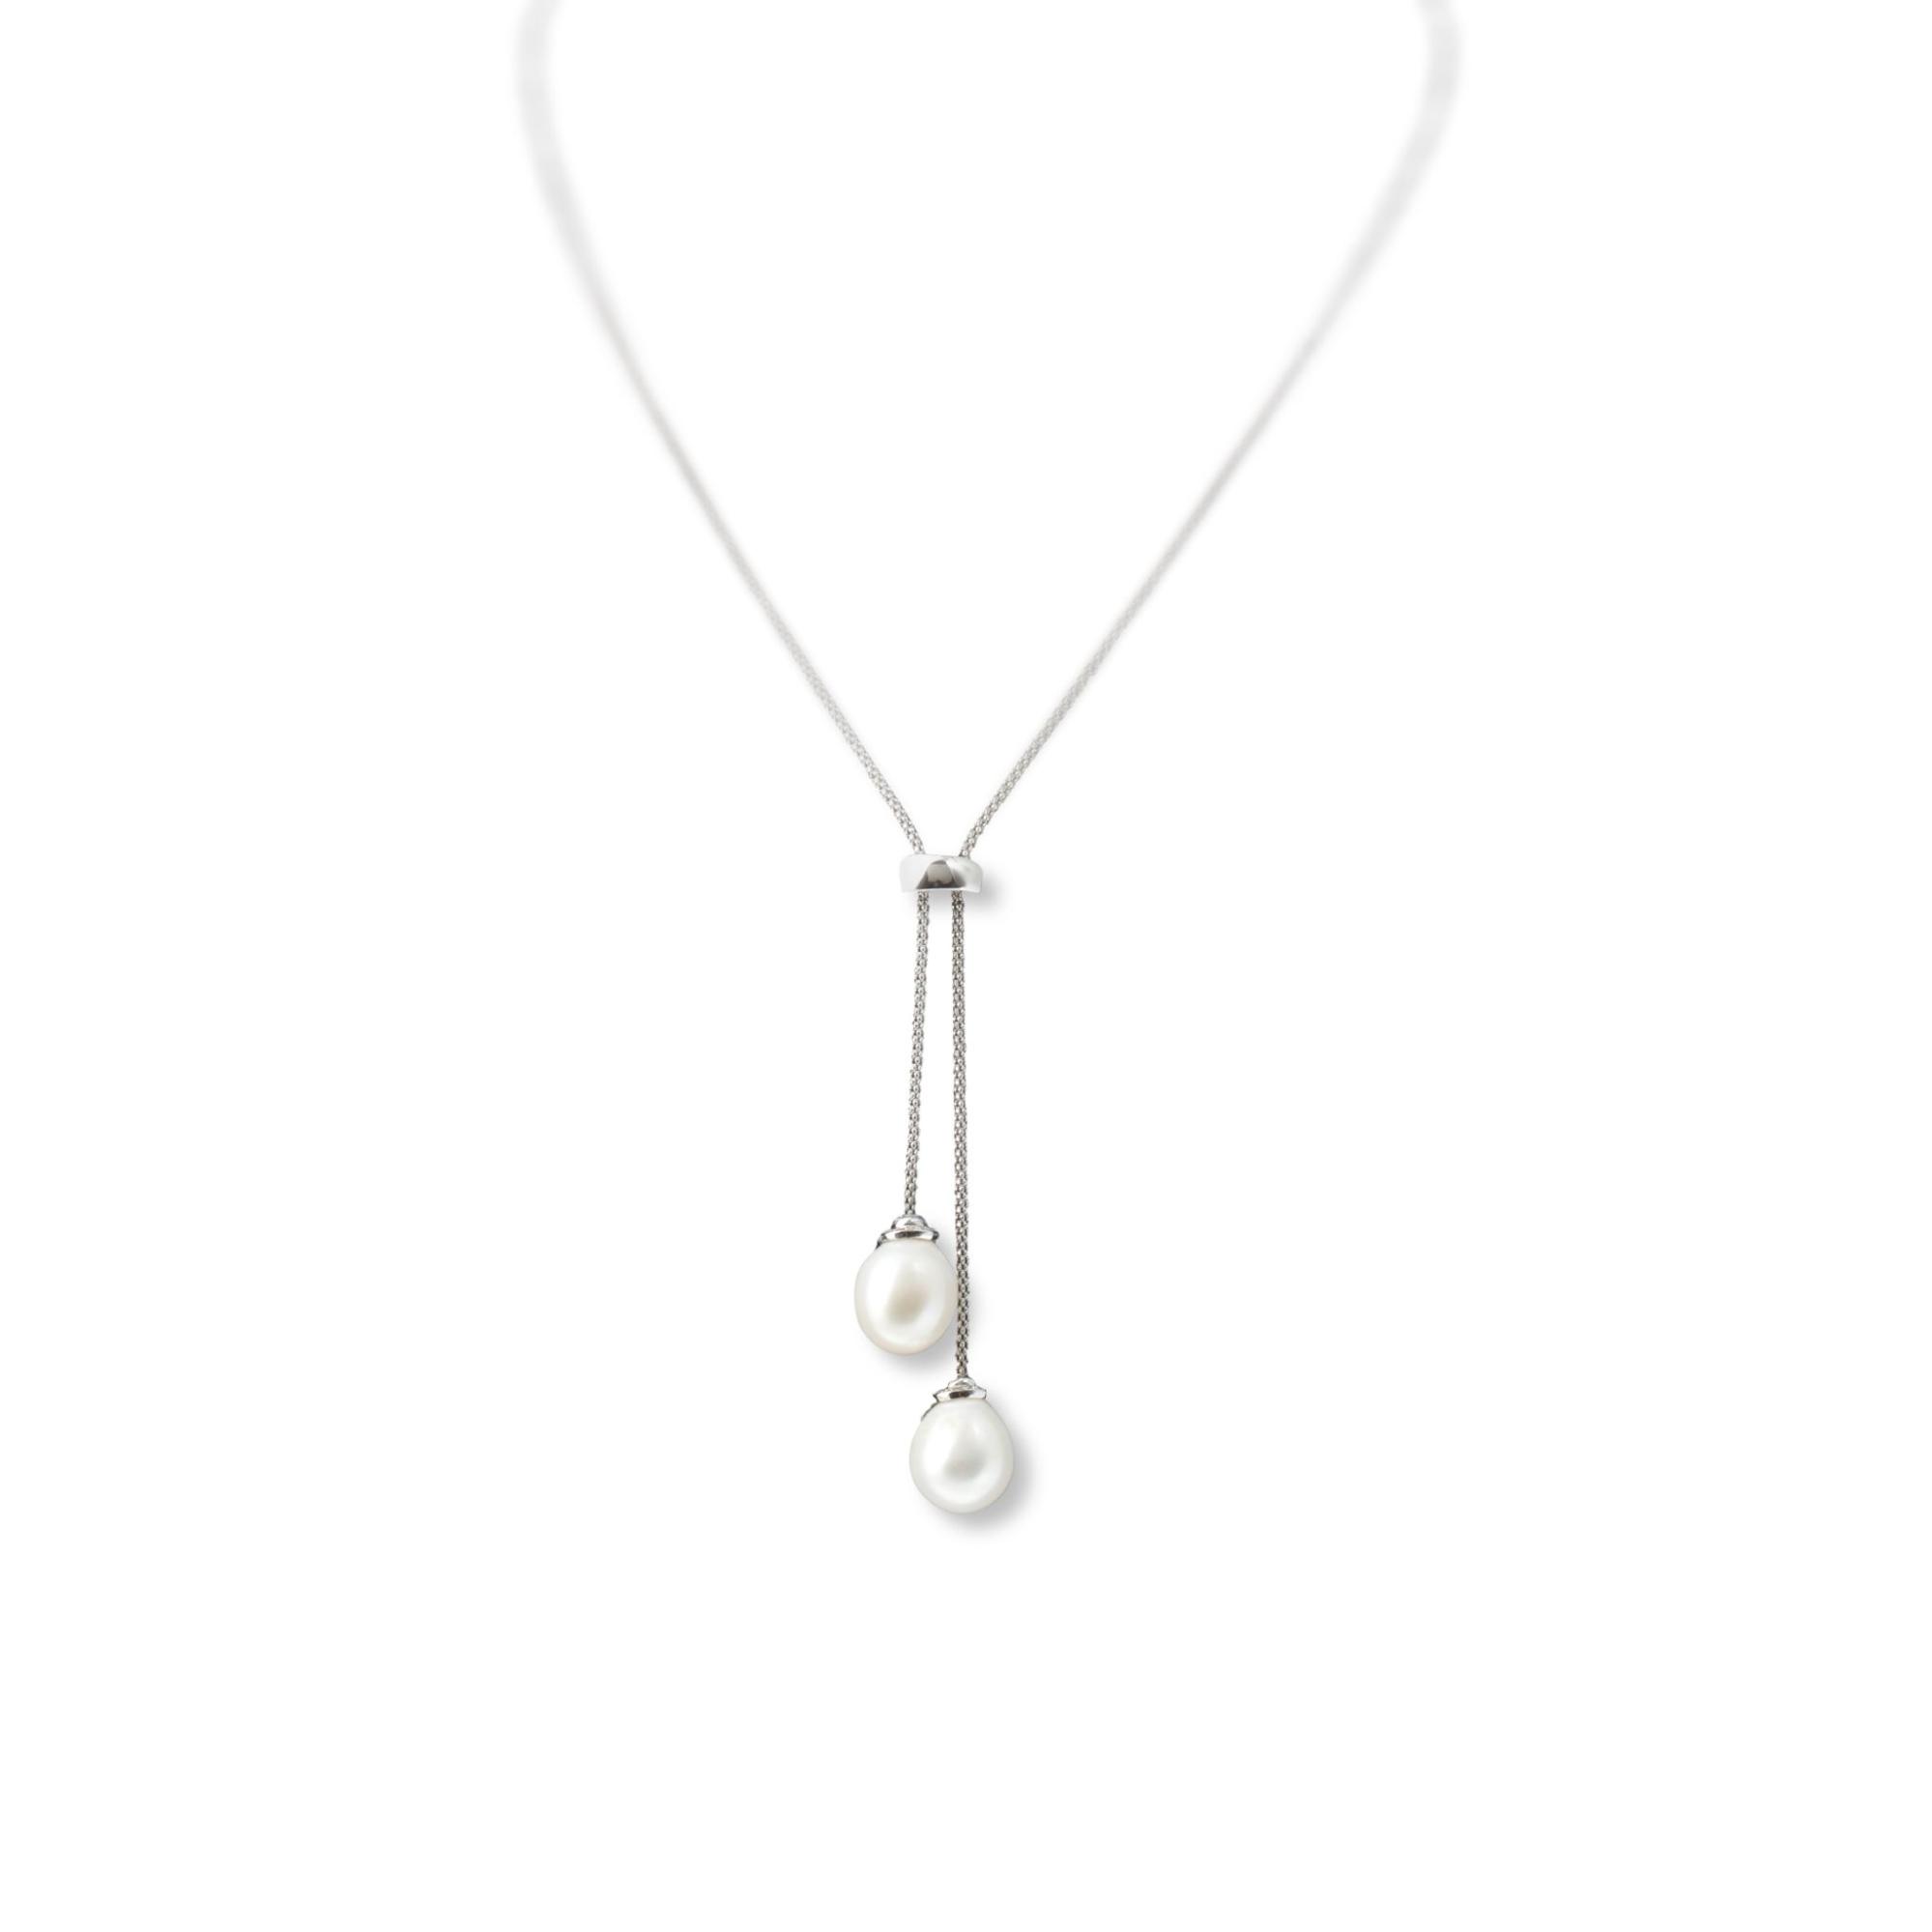 A white gold Y necklace with drop down pearls